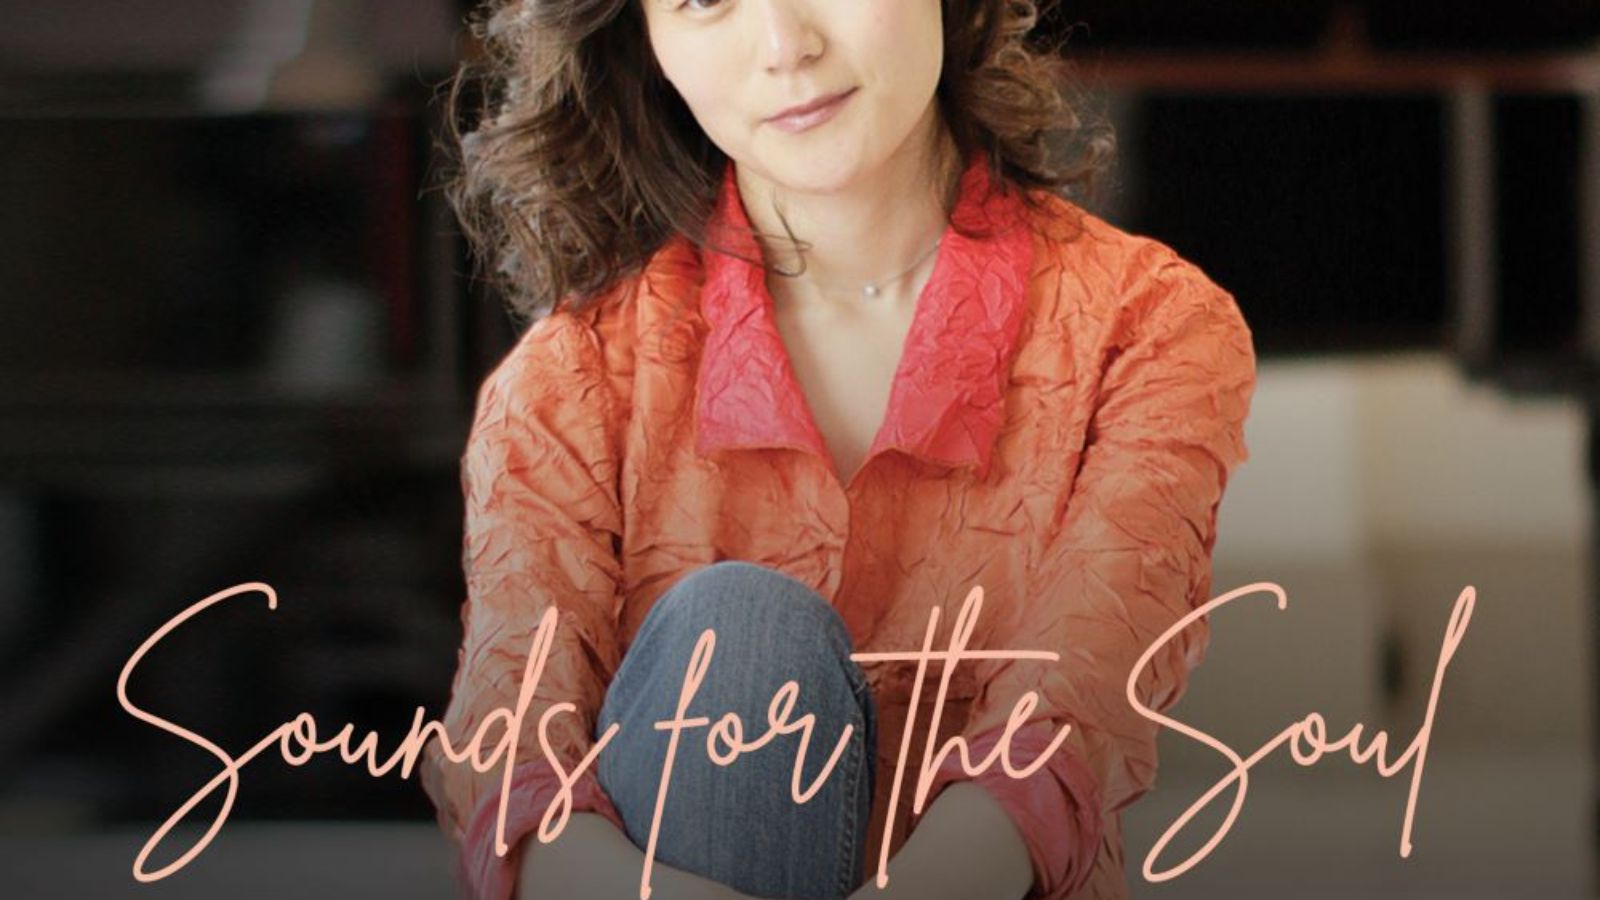 Sounds for the Soul - Min-Jung Kym - Steinway & Sons